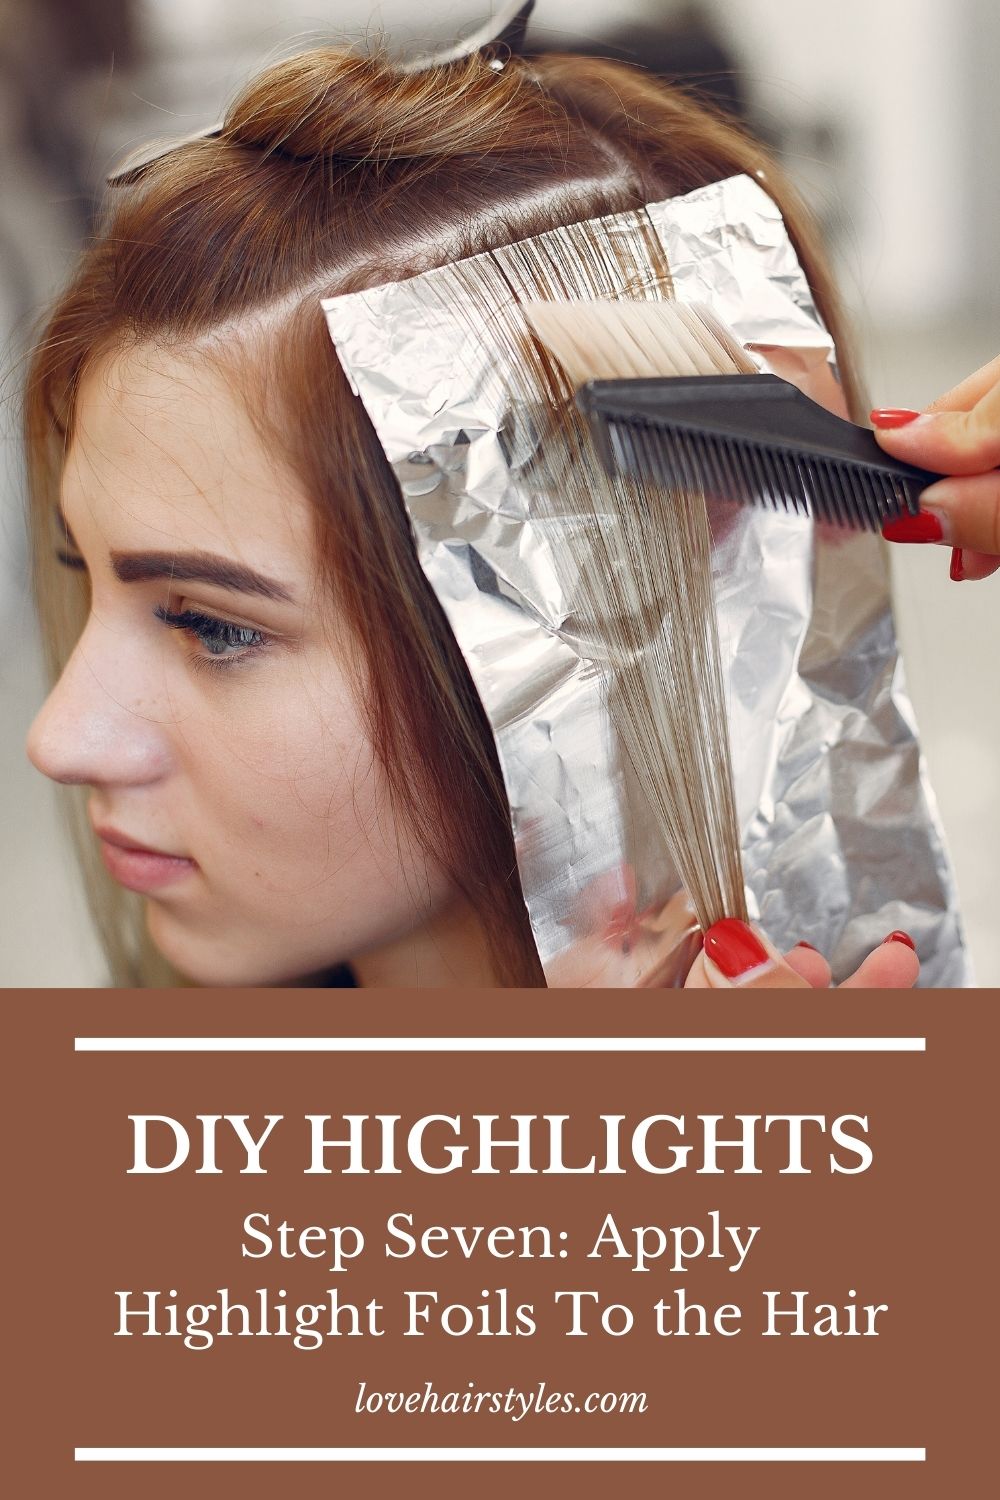 Step Seven: Apply Highlight Foils To the Hair